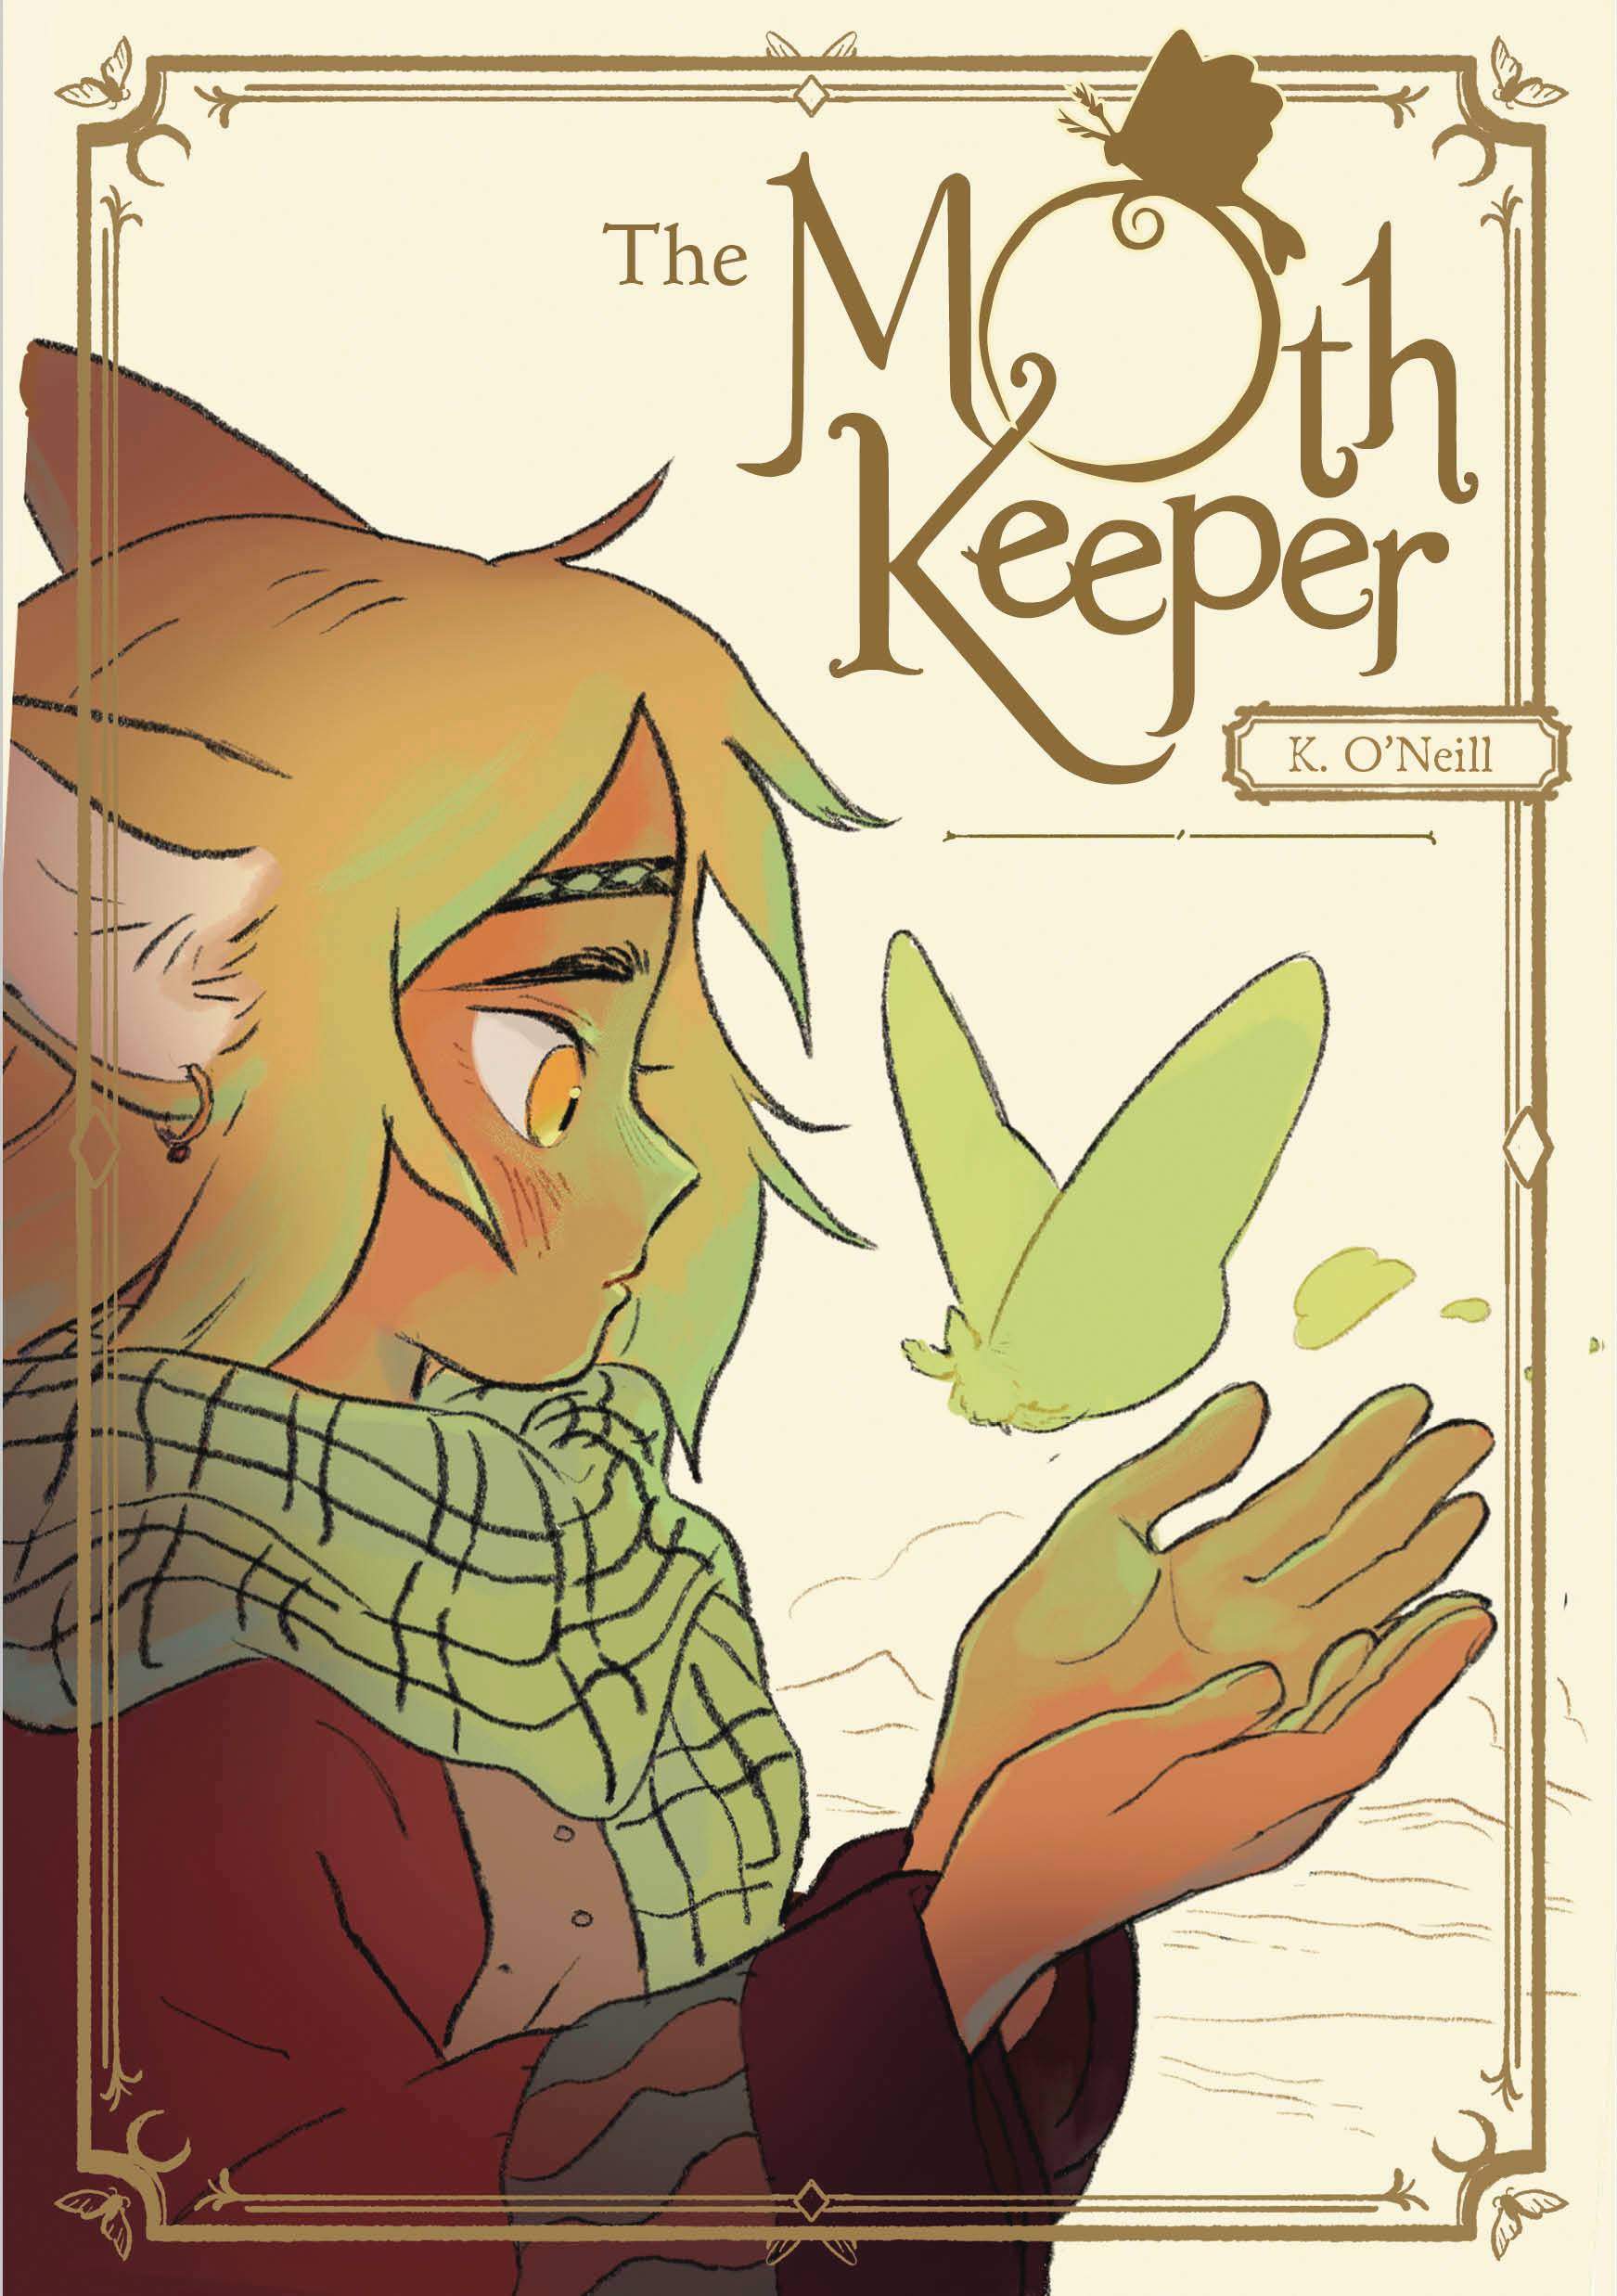 The Moth Keeper s/c